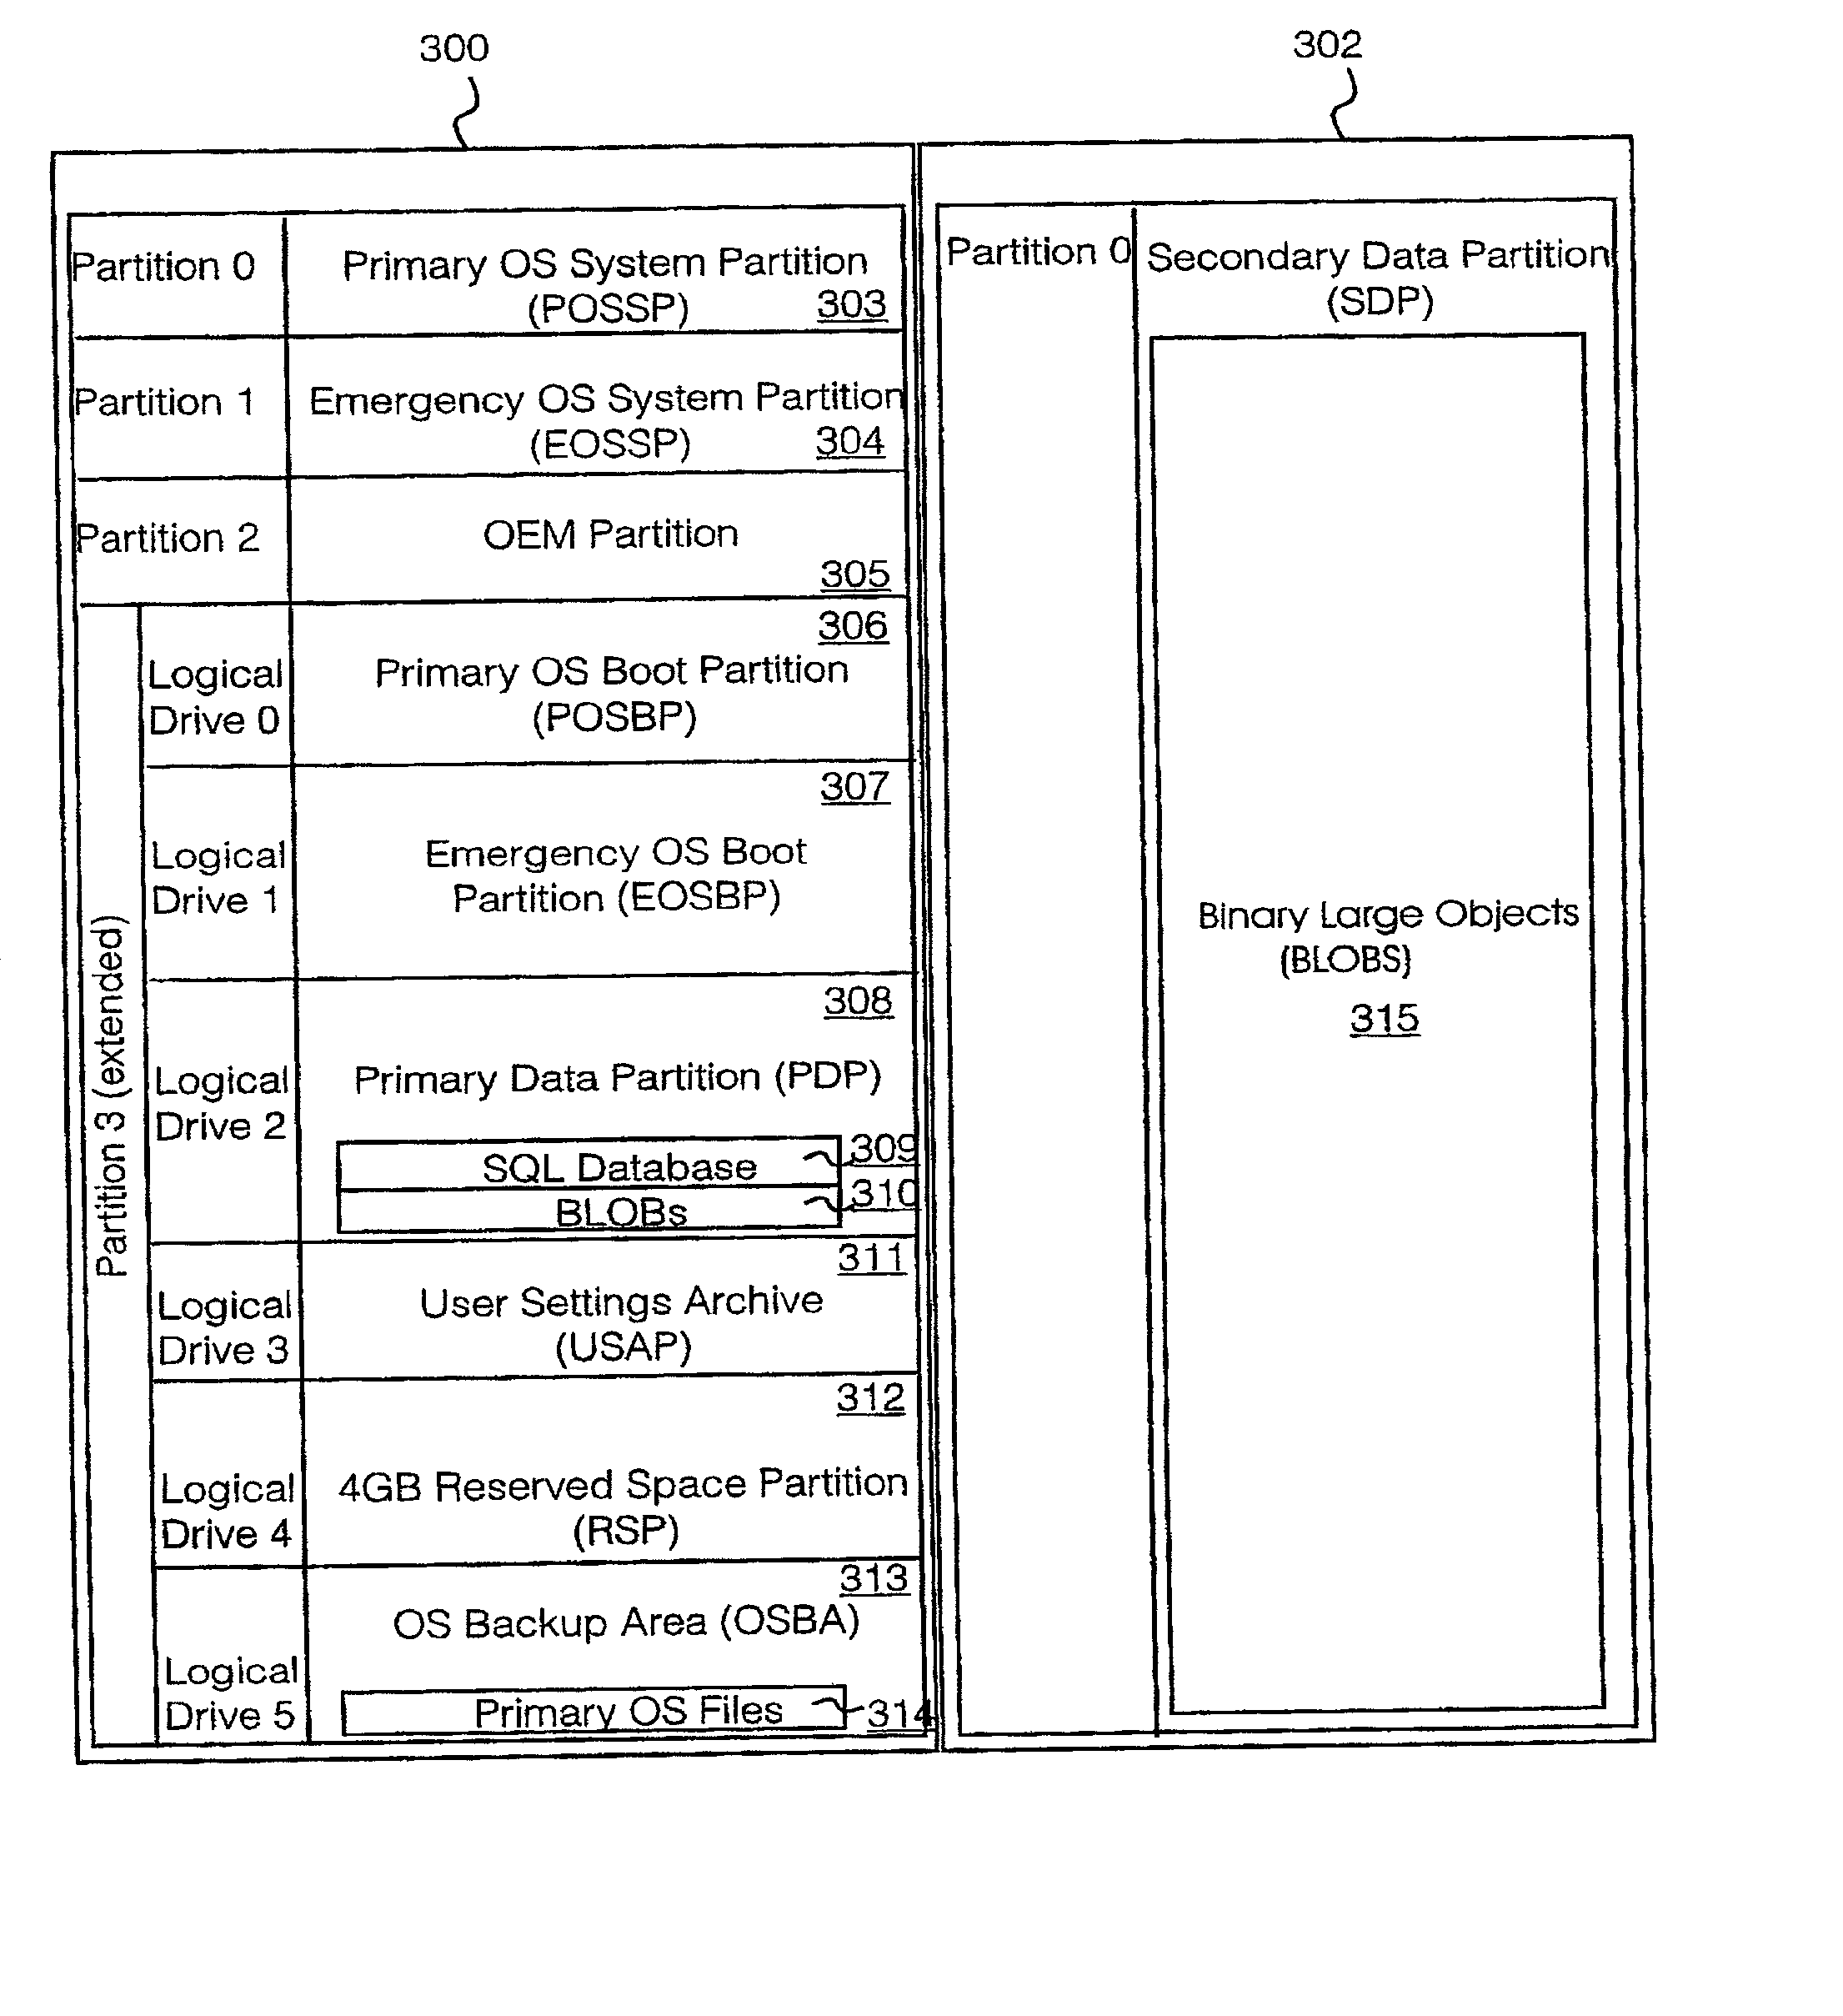 Performing operating system recovery from external back-up media in a headless computer entity